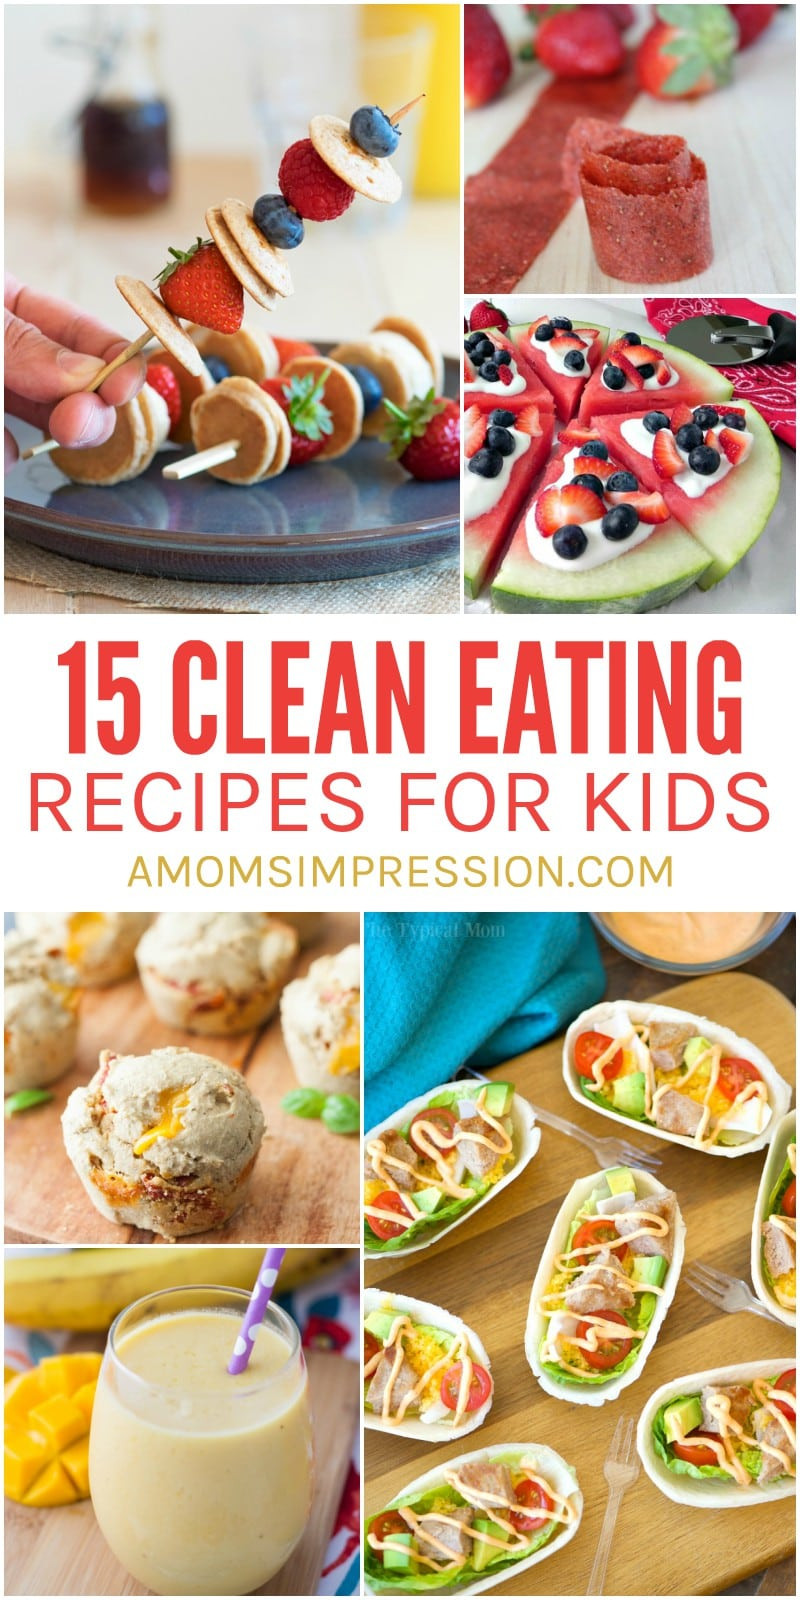 Clean Eating Recipes For Kids
 Kid Friendly Food 15 Clean Eating Recipes for Kids